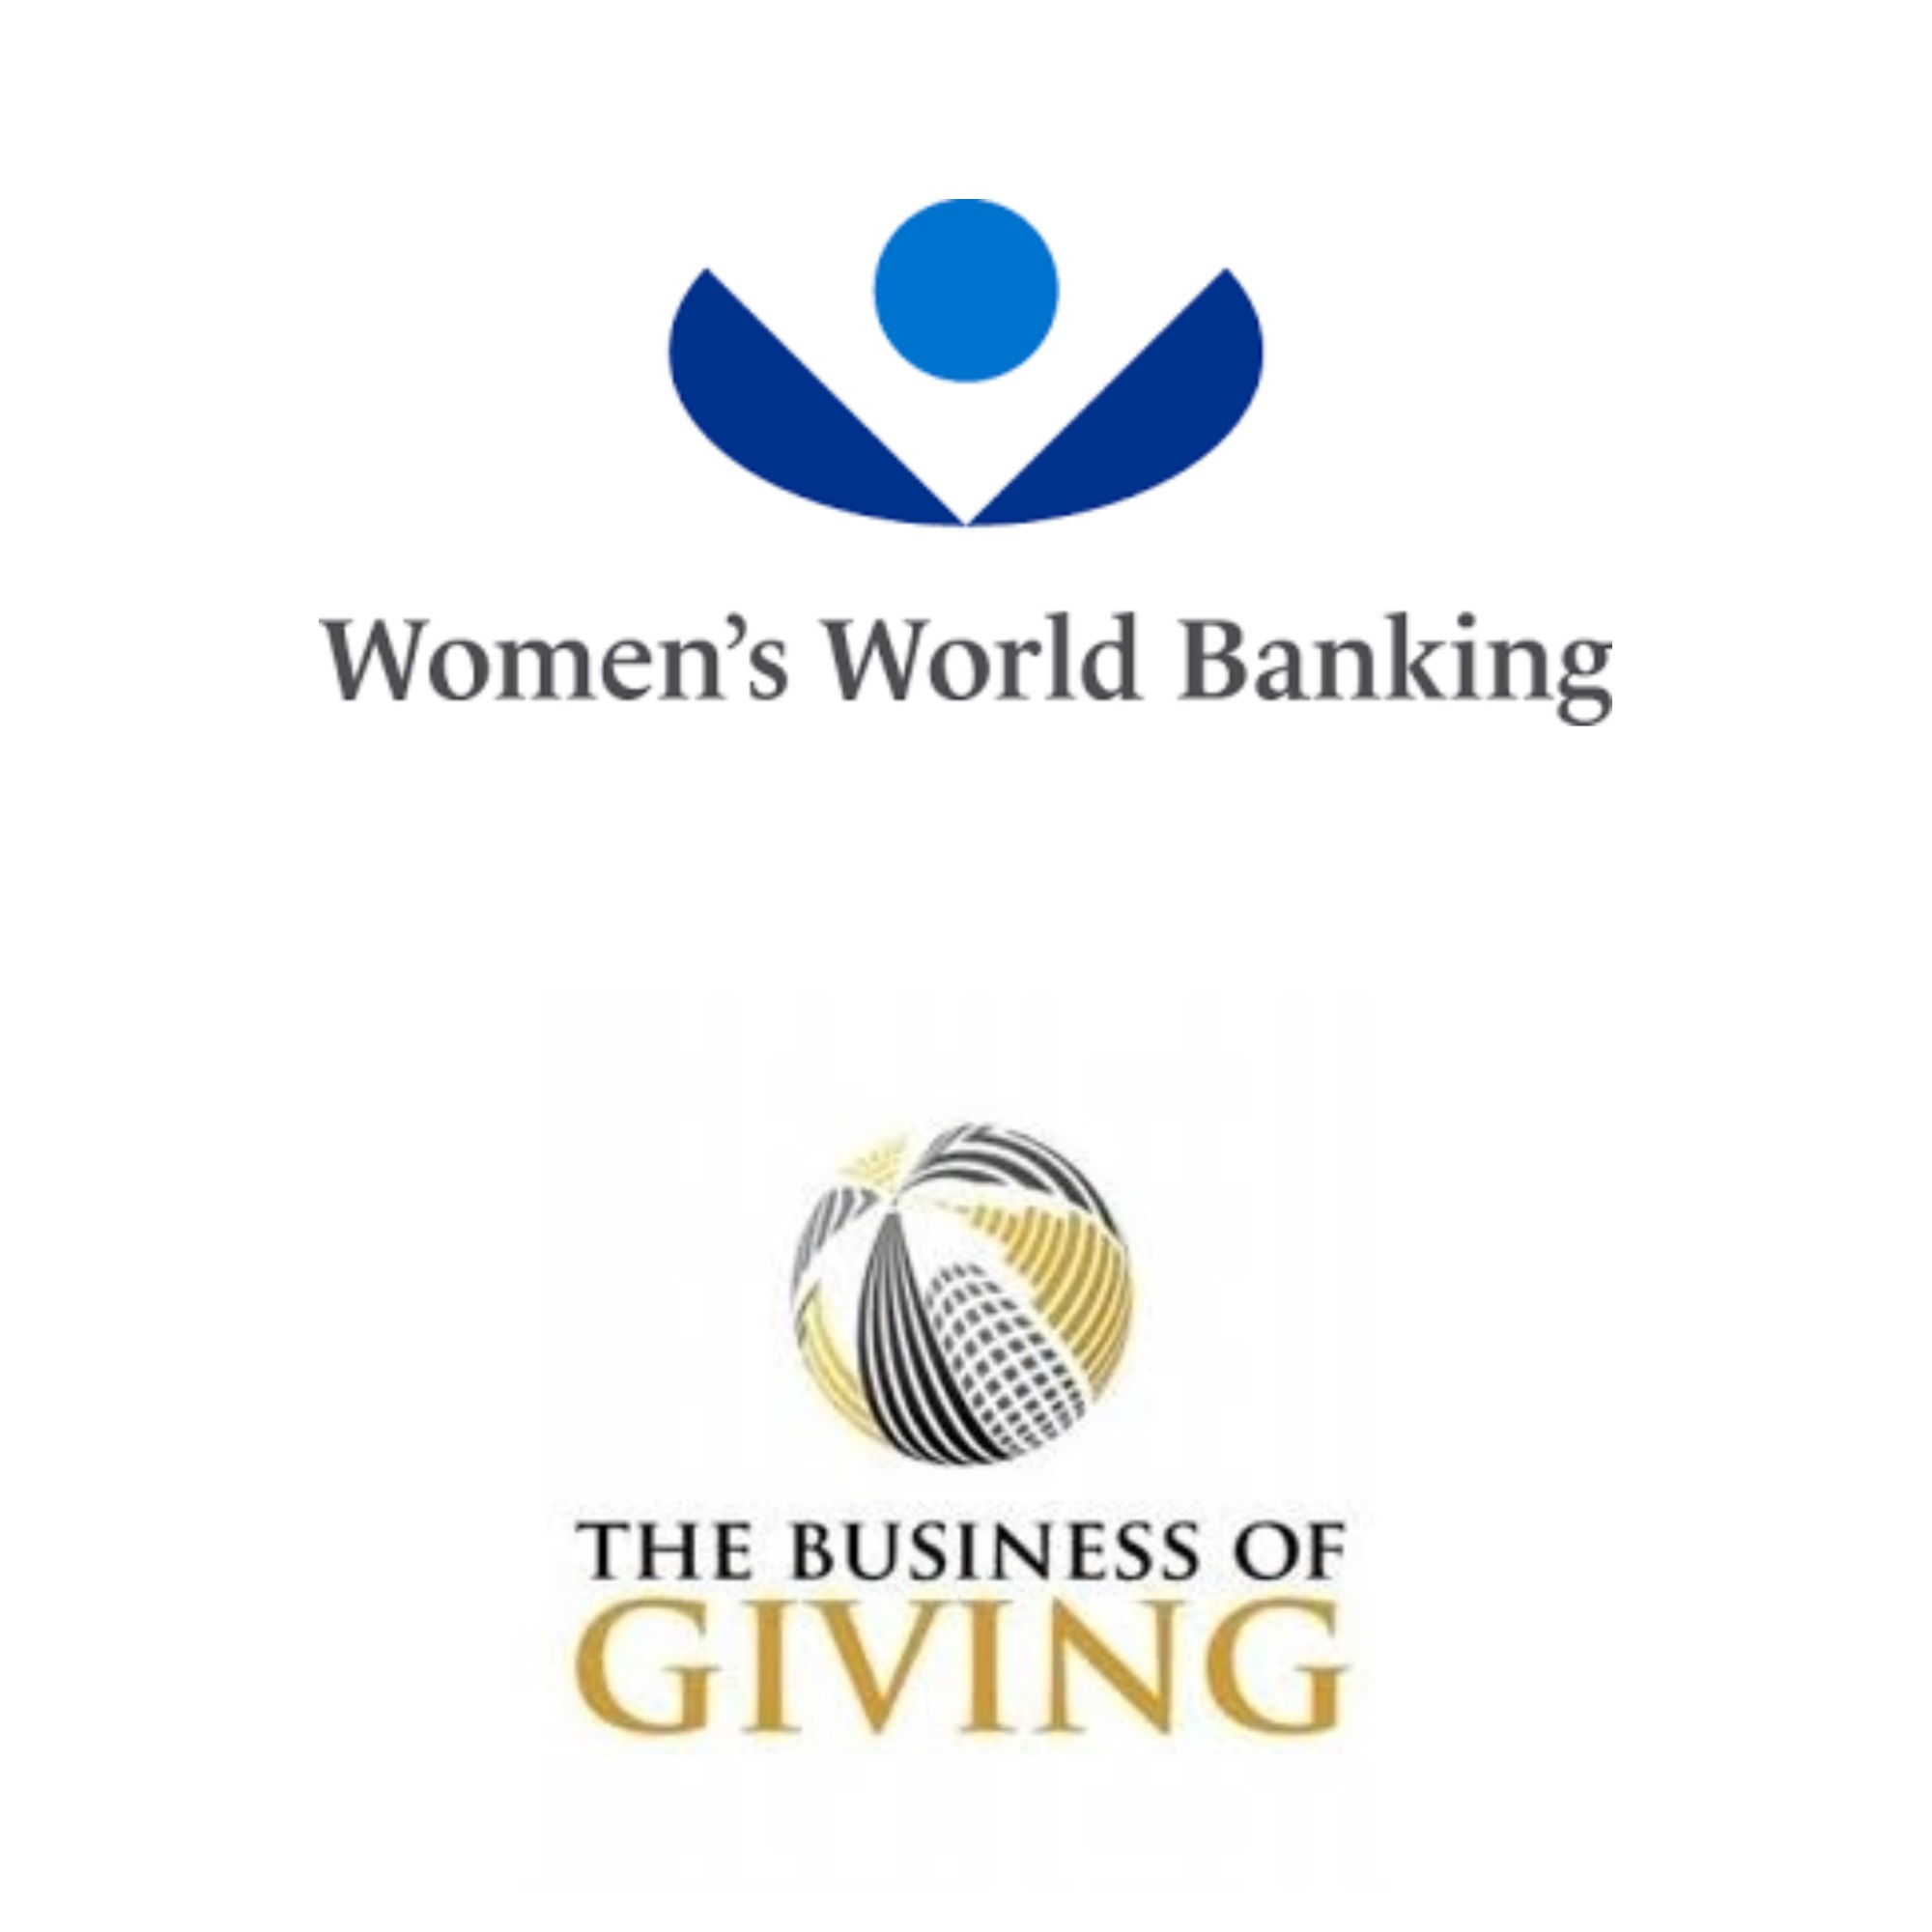 Mary Ellen Iskenderian, President and CEO of Women’s World Banking